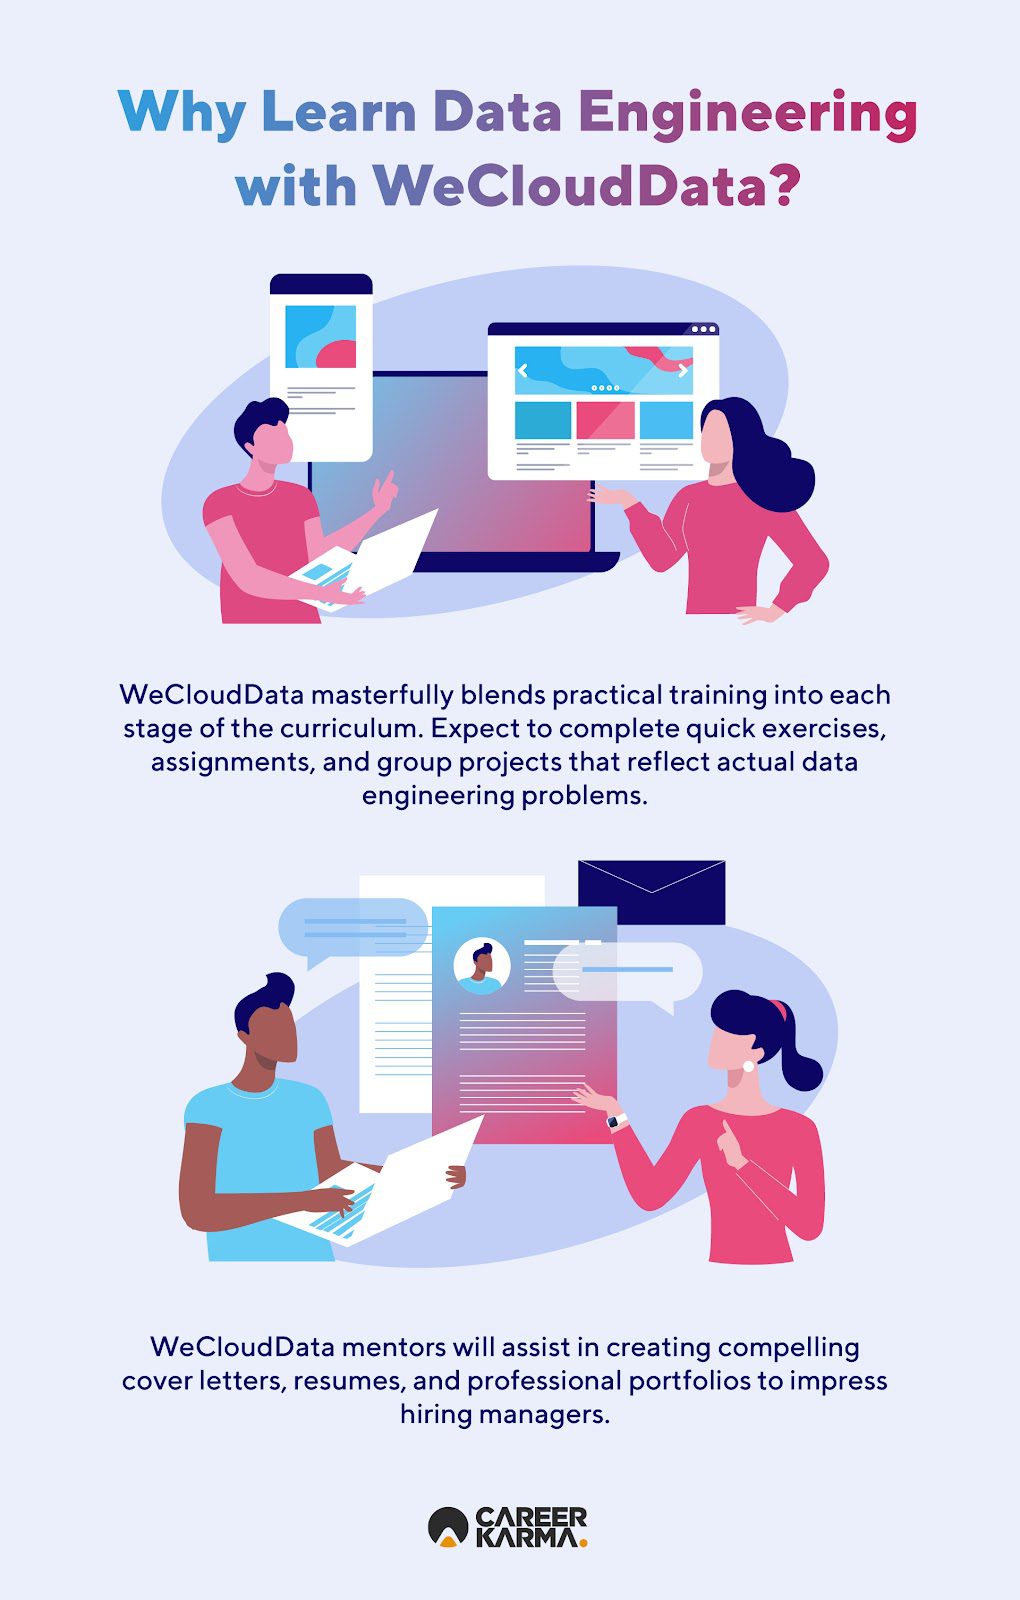 An infographic highlighting why you should learn data engineering at WeCloudData